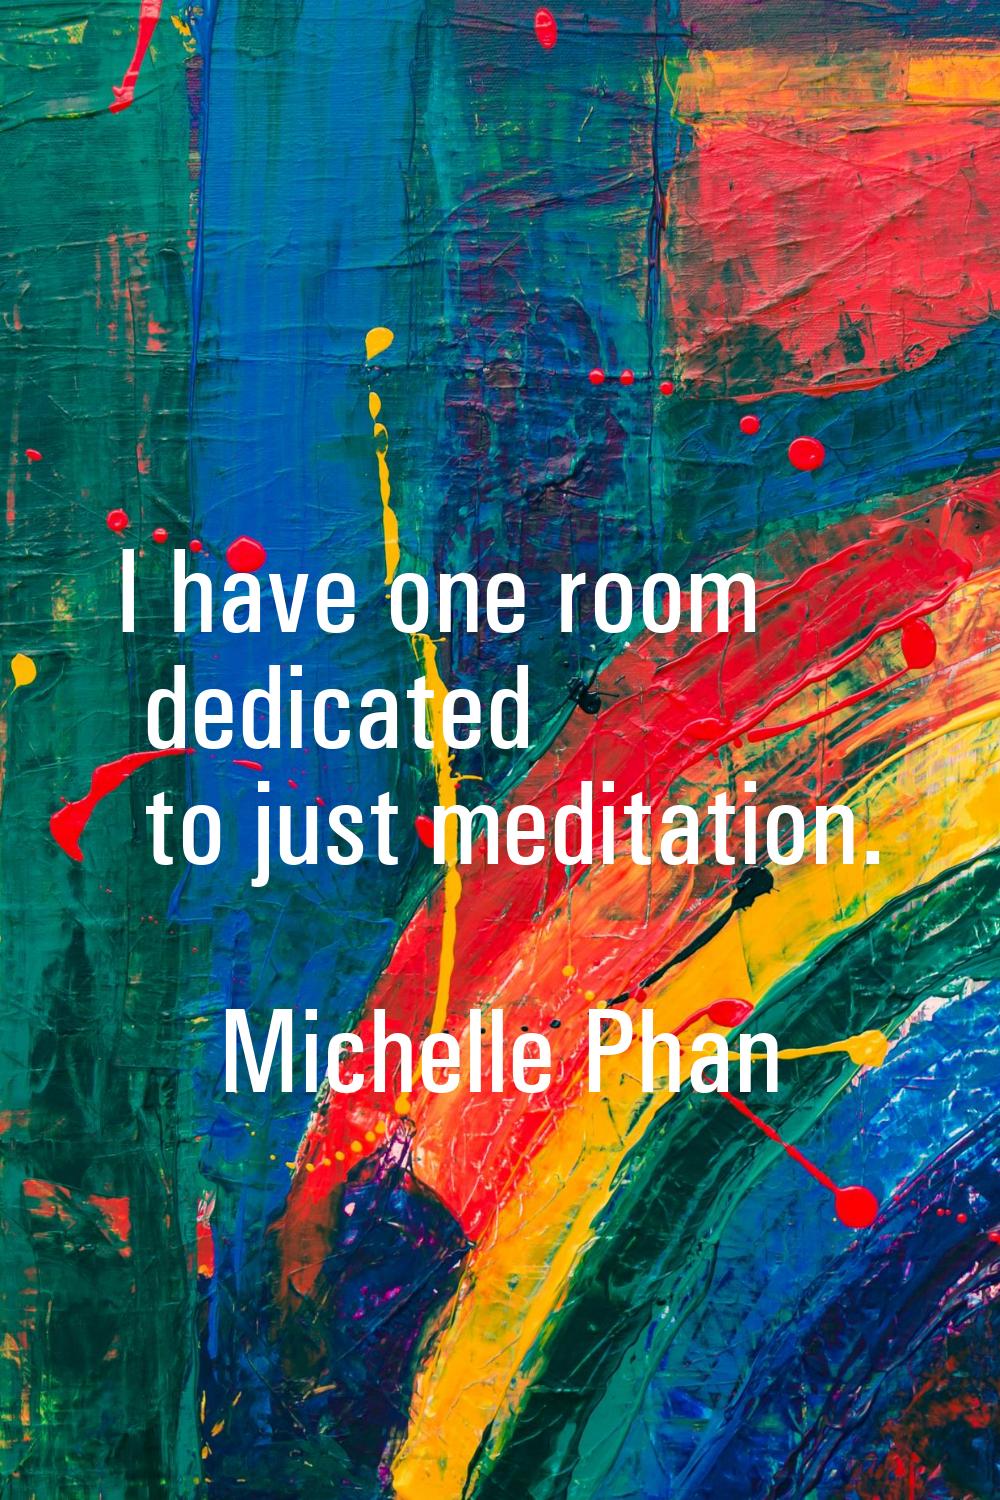 I have one room dedicated to just meditation.